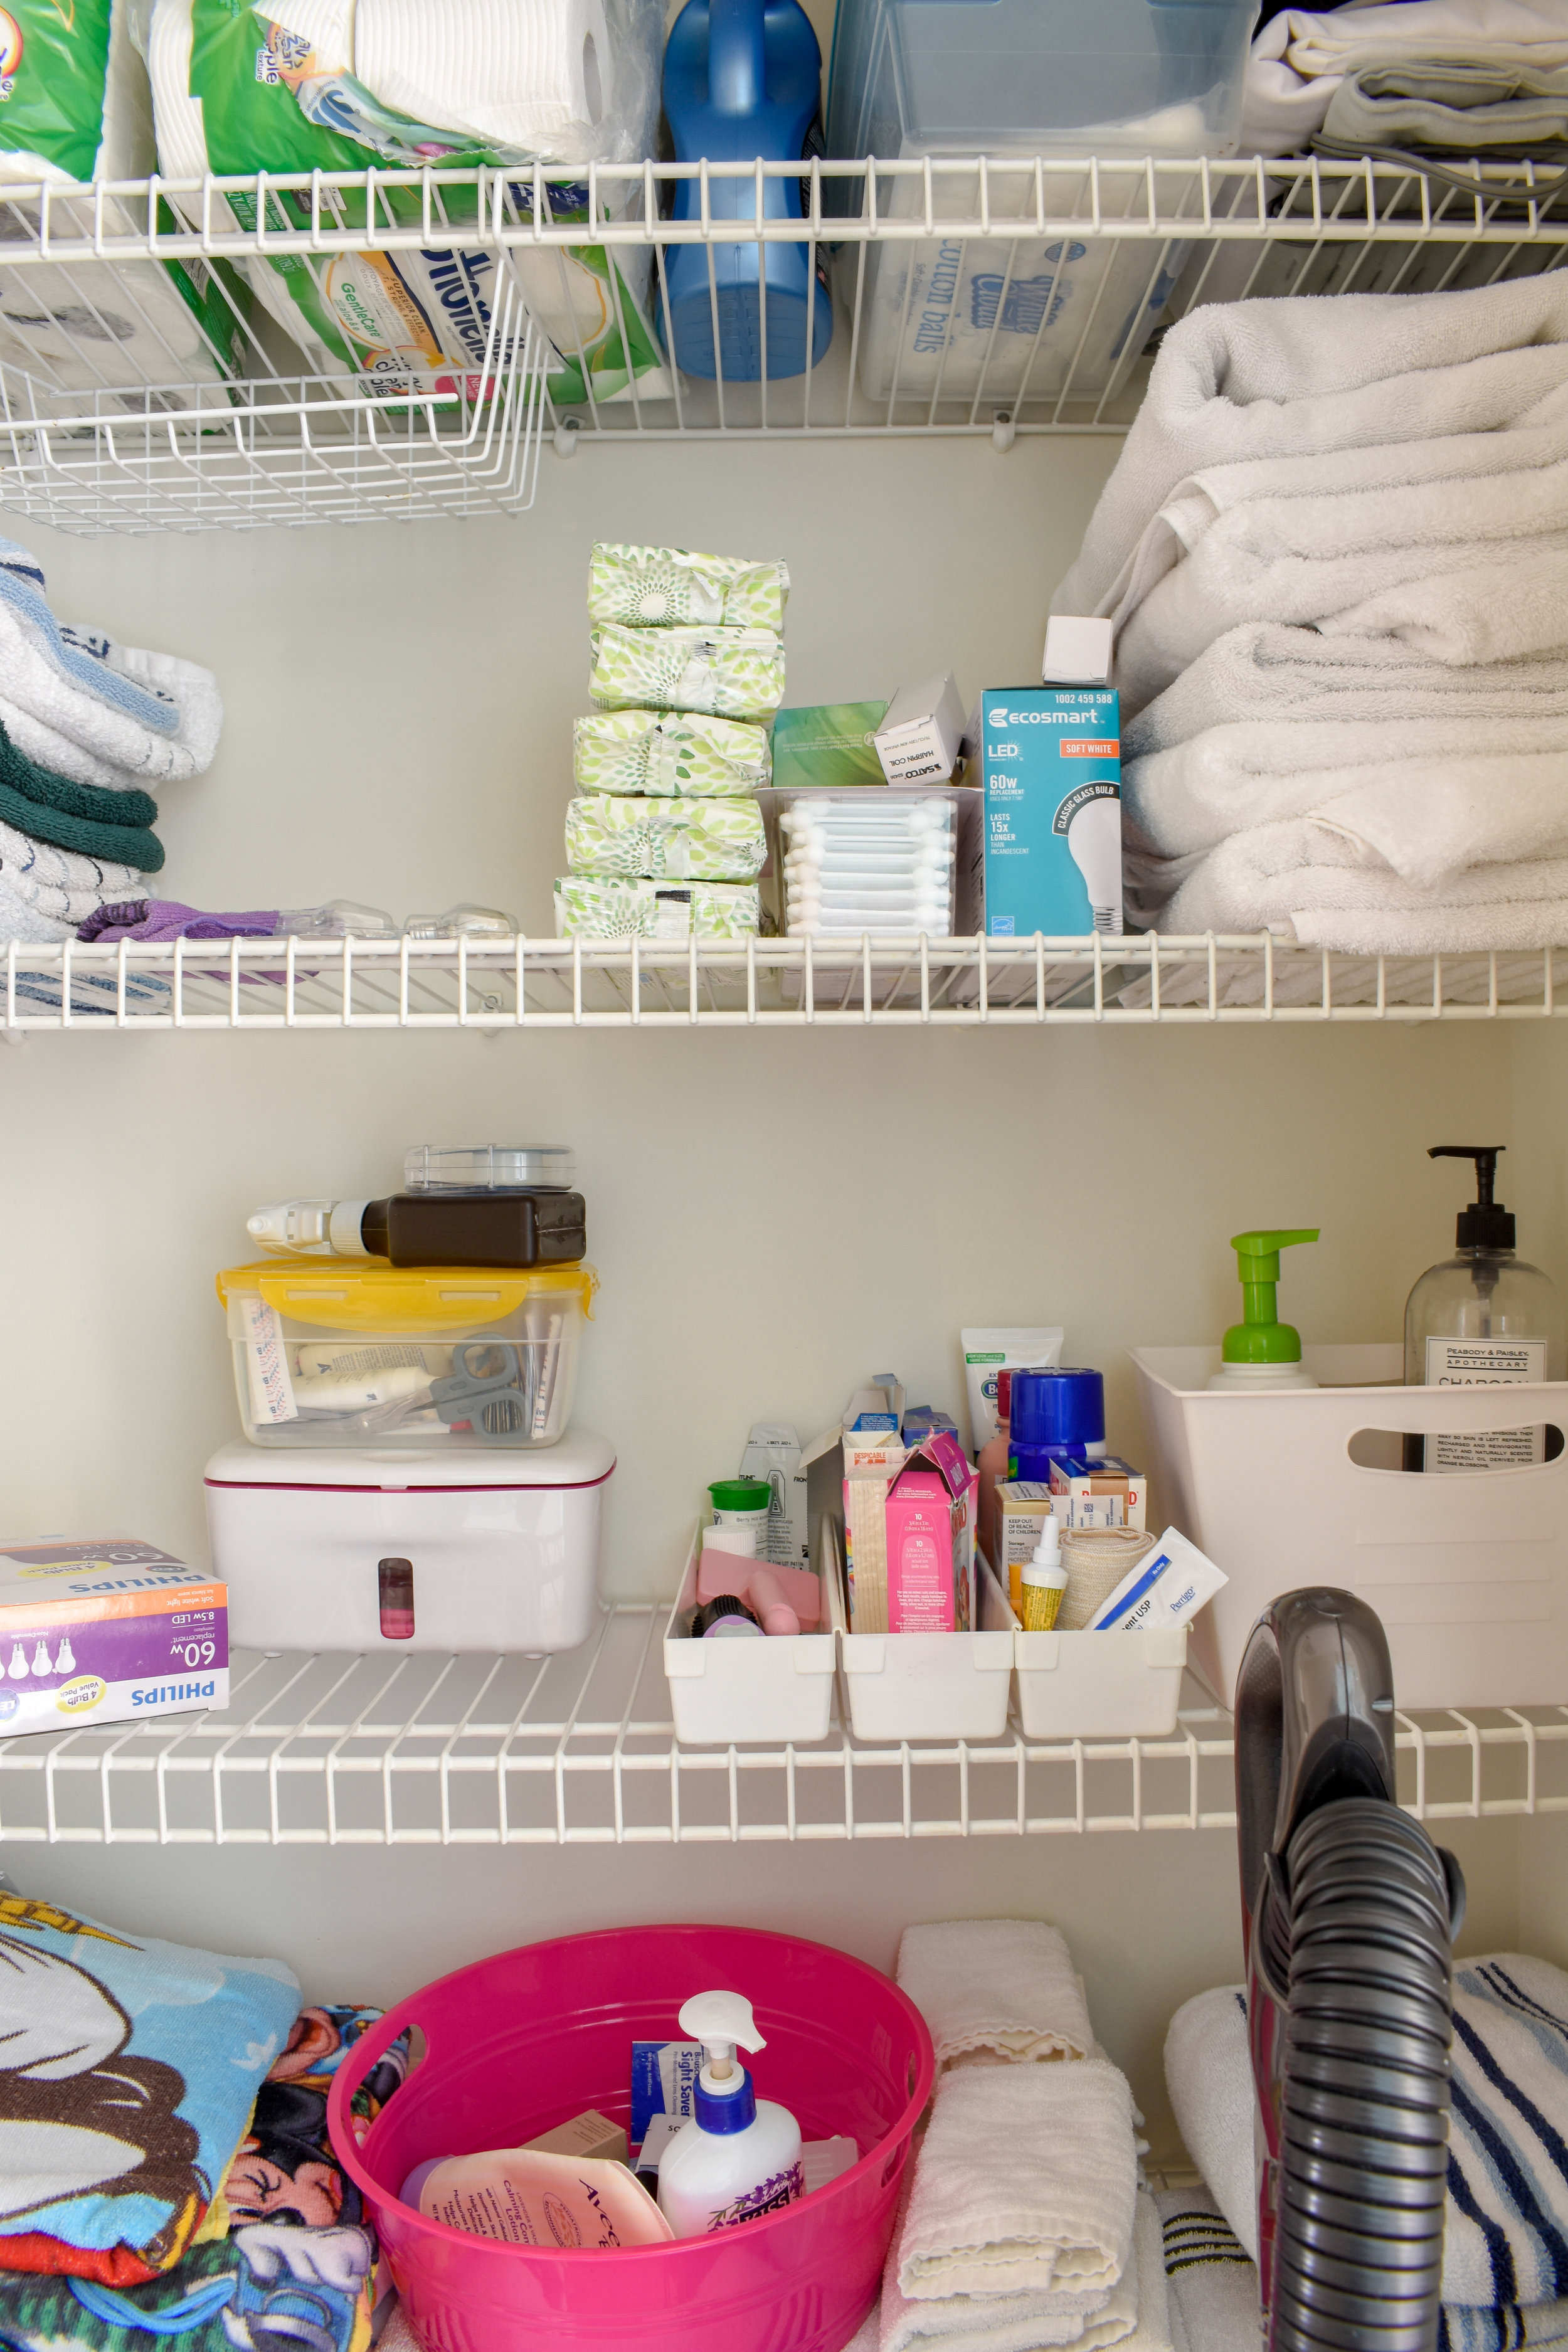 Bathroom Organizing DIY: How To Easily Double The Storage Capacity Under Your Sink For Cheap #organization #diyhacks #bathroomstorage #organizeit #springcleaning